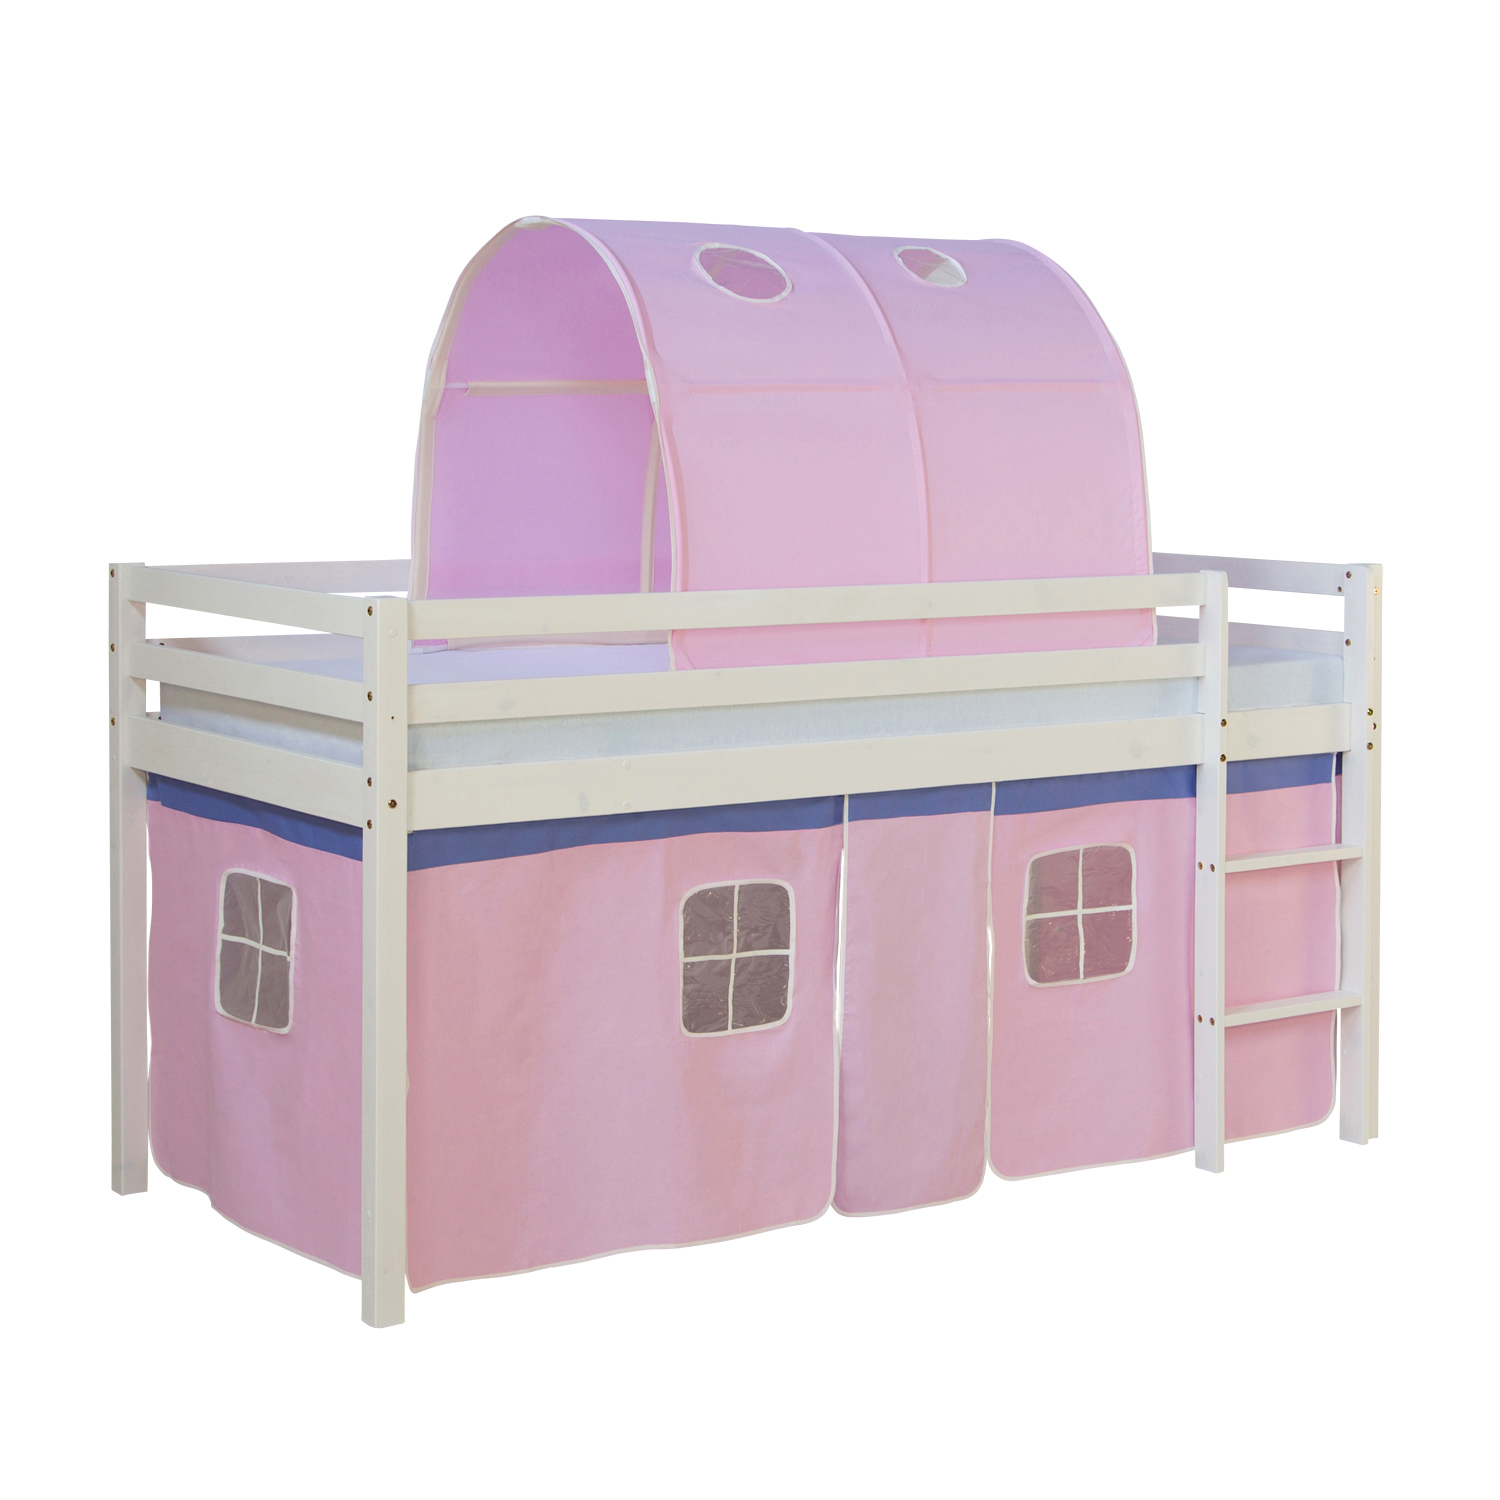 Loftbed 90x200 cm with Slats Bunk bed Childrens bed Tunnel Curtain Pink Solid Pine Wood